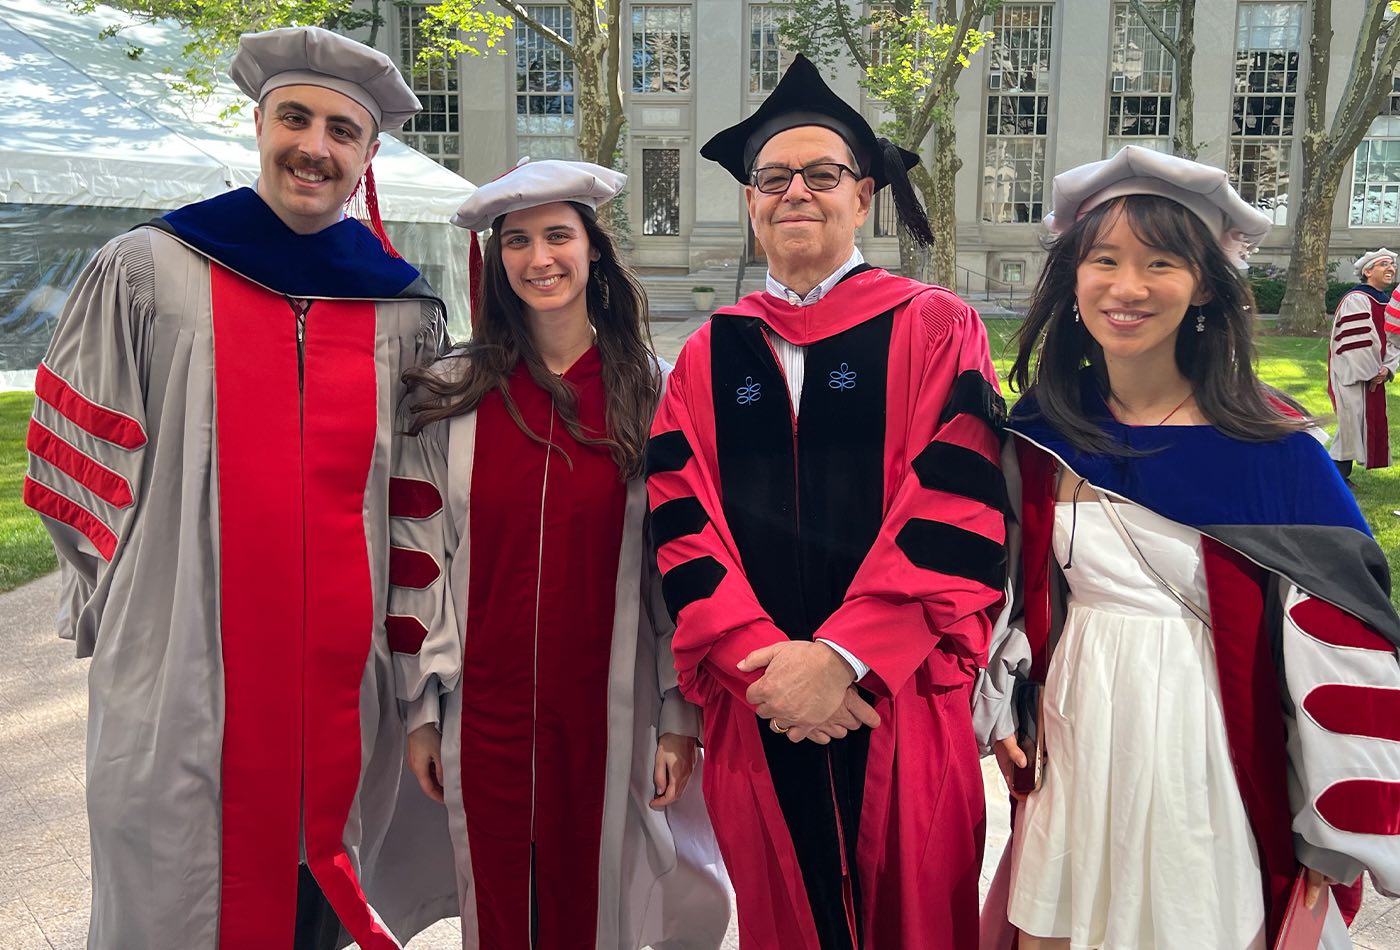 Professor Steve Buchwald smiles with three newly minted PhD recipients from his research group, all in regalia.